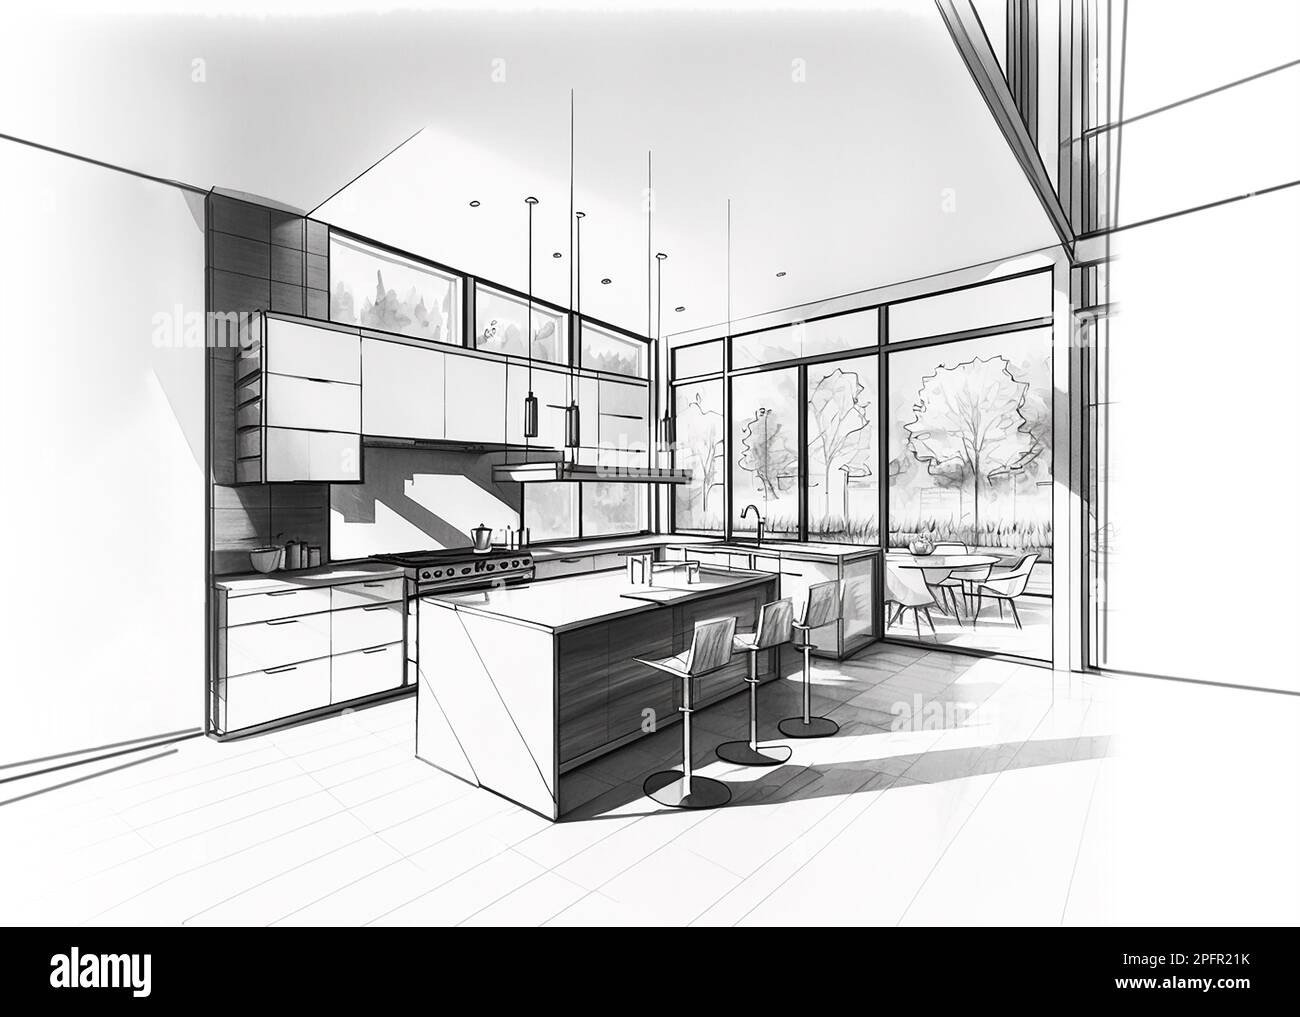 Architectural sketch of a modern modern kitchen, black and white drawing Stock Photo